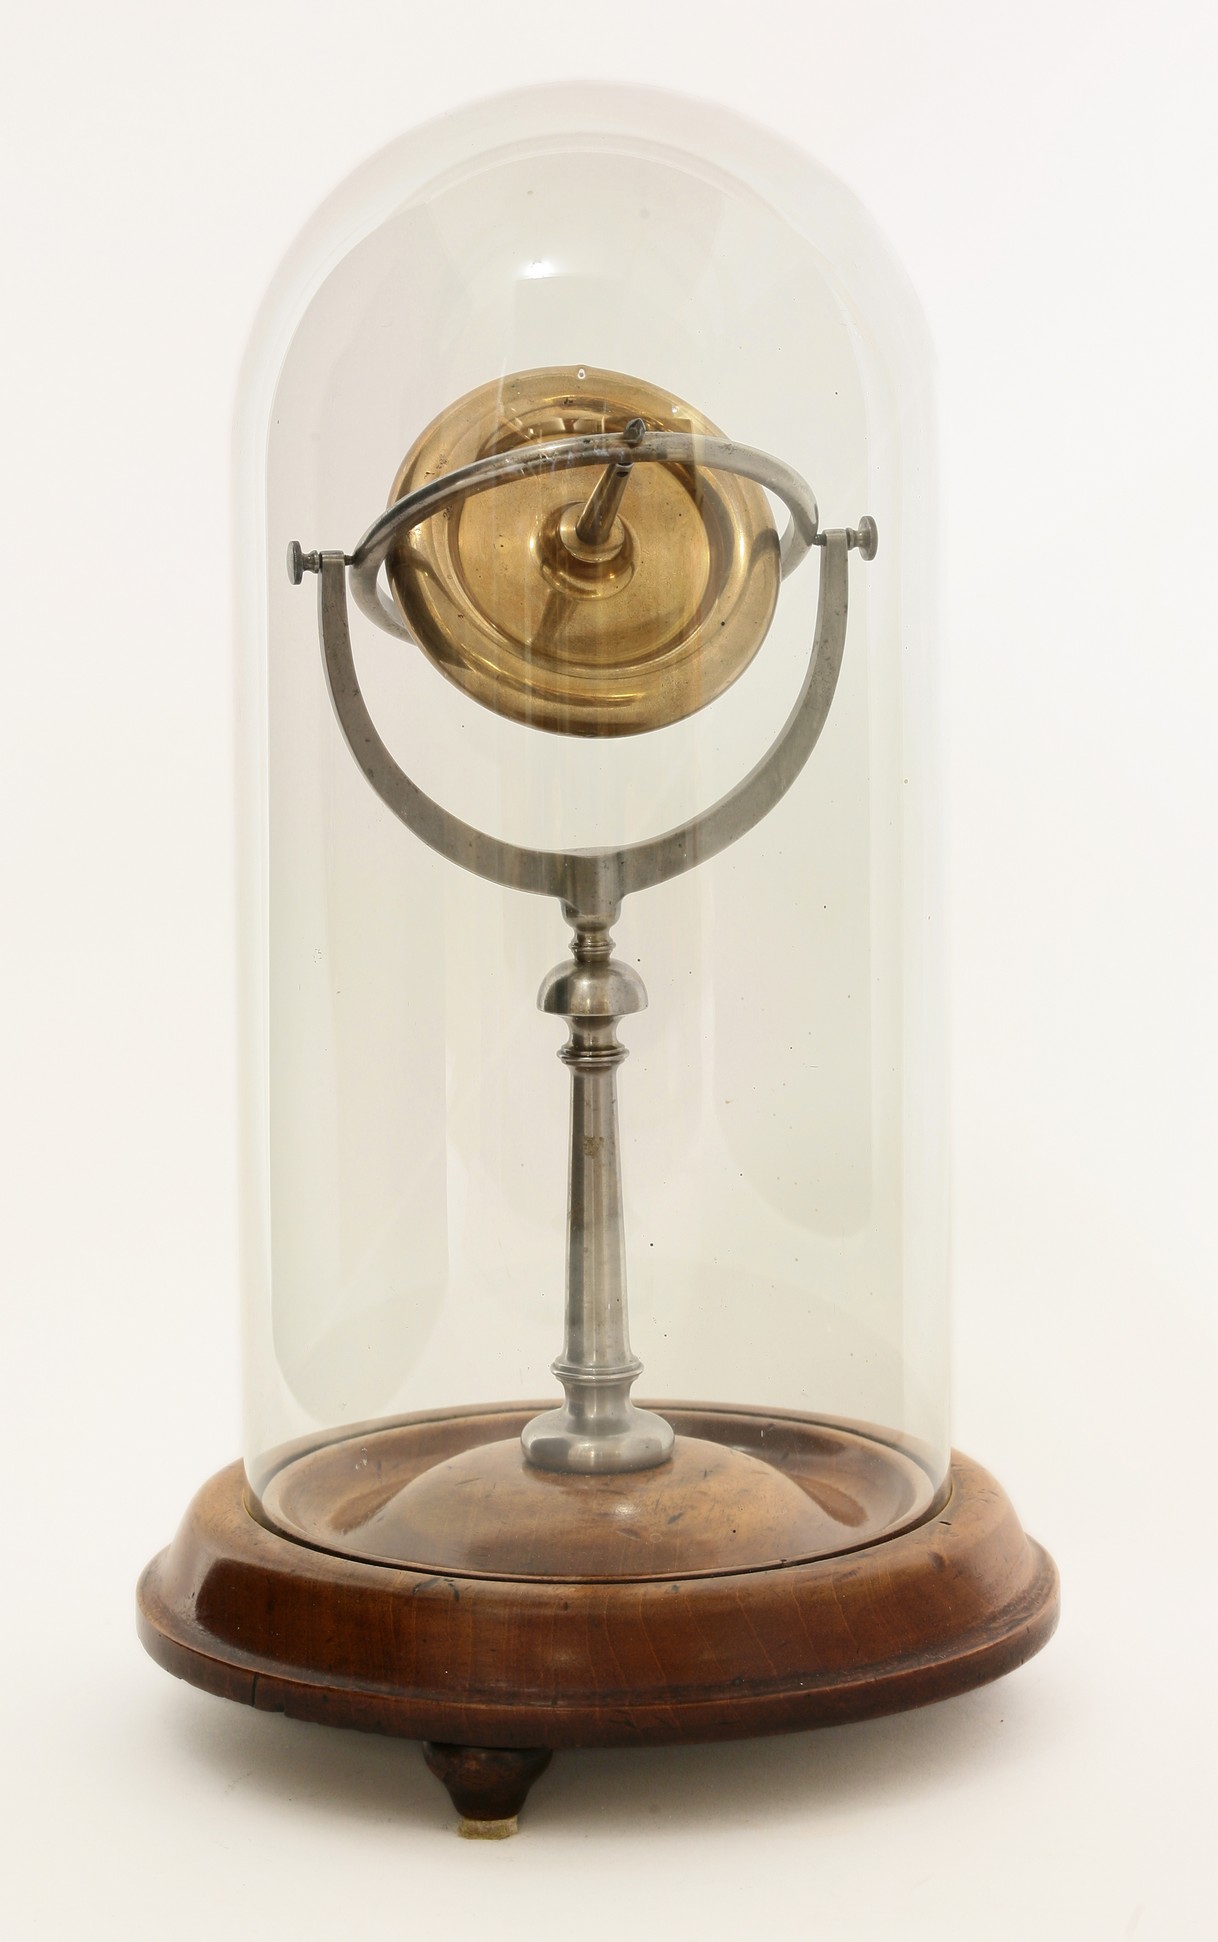 A brass and steel demonstration gyroscope,
19th century, upon a turned walnut base beneath a glass